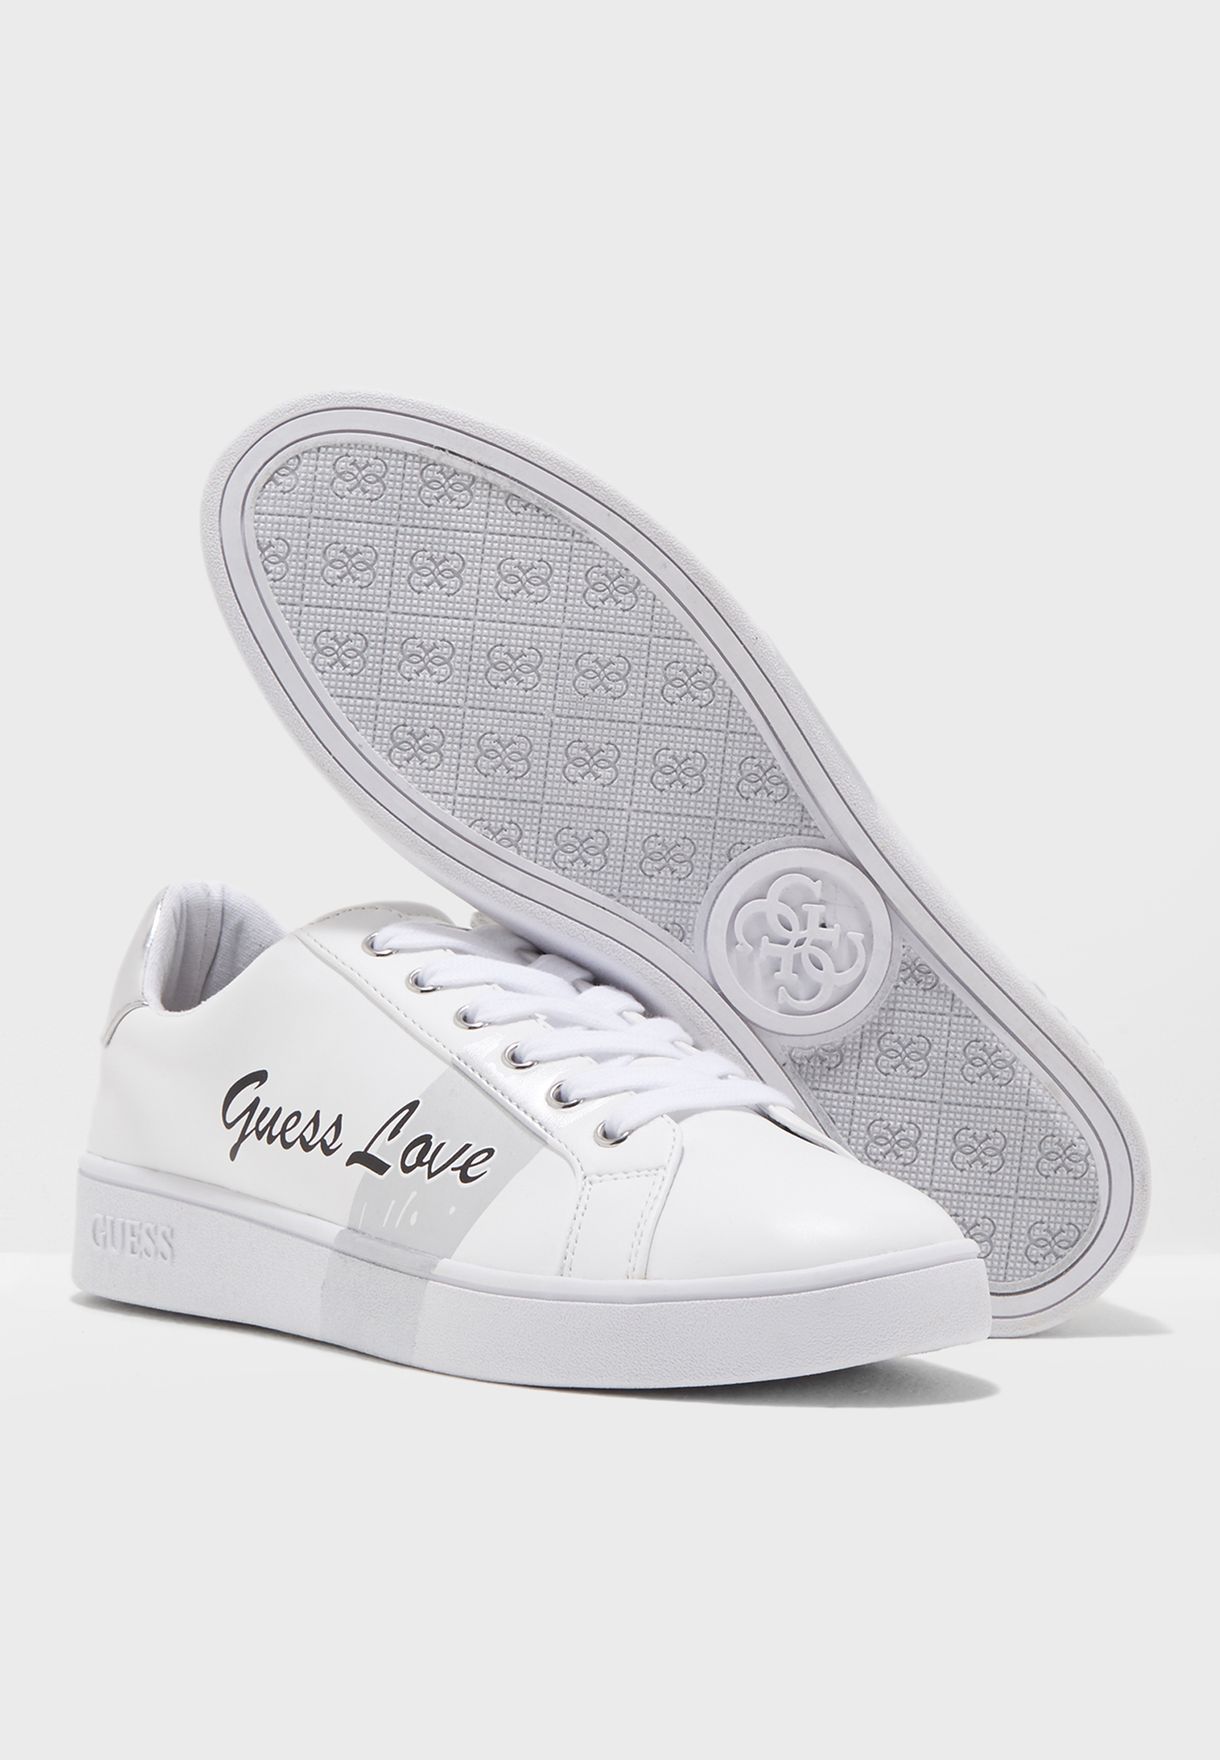 guess love shoes